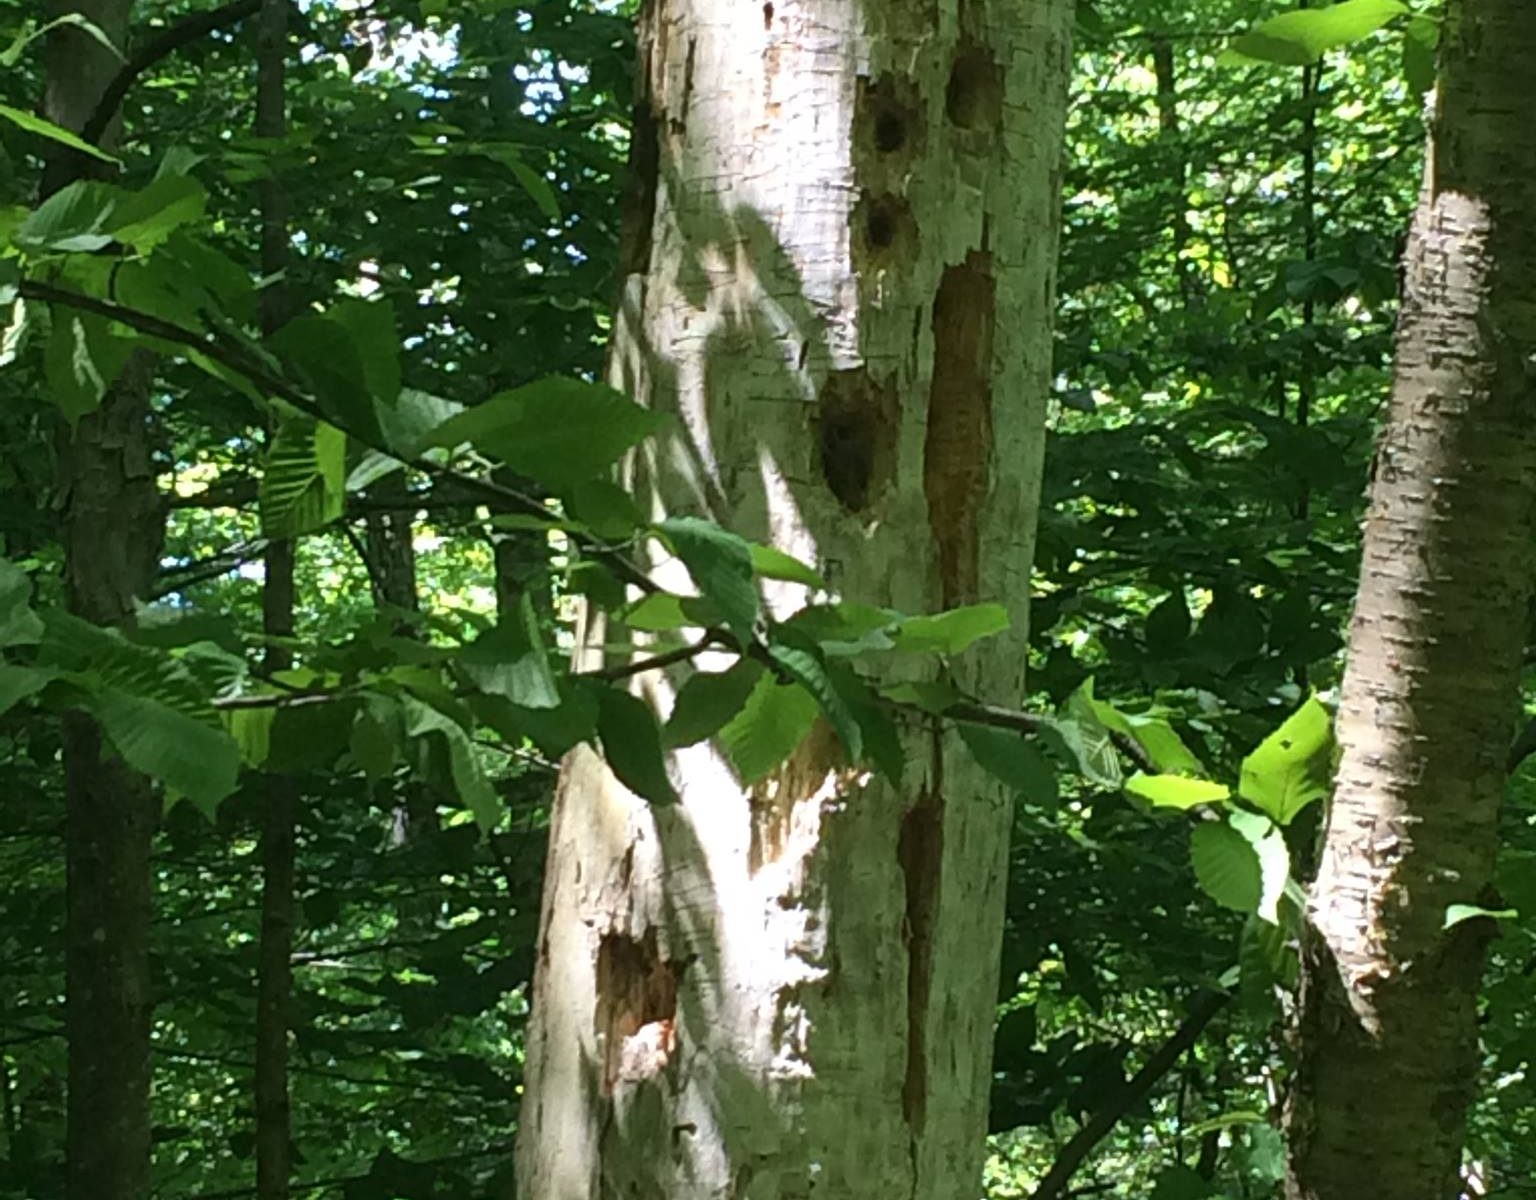 Dead tree trunk, barkless, with deep holes created by pileated woodpecker. Green forest foliage visible in background.